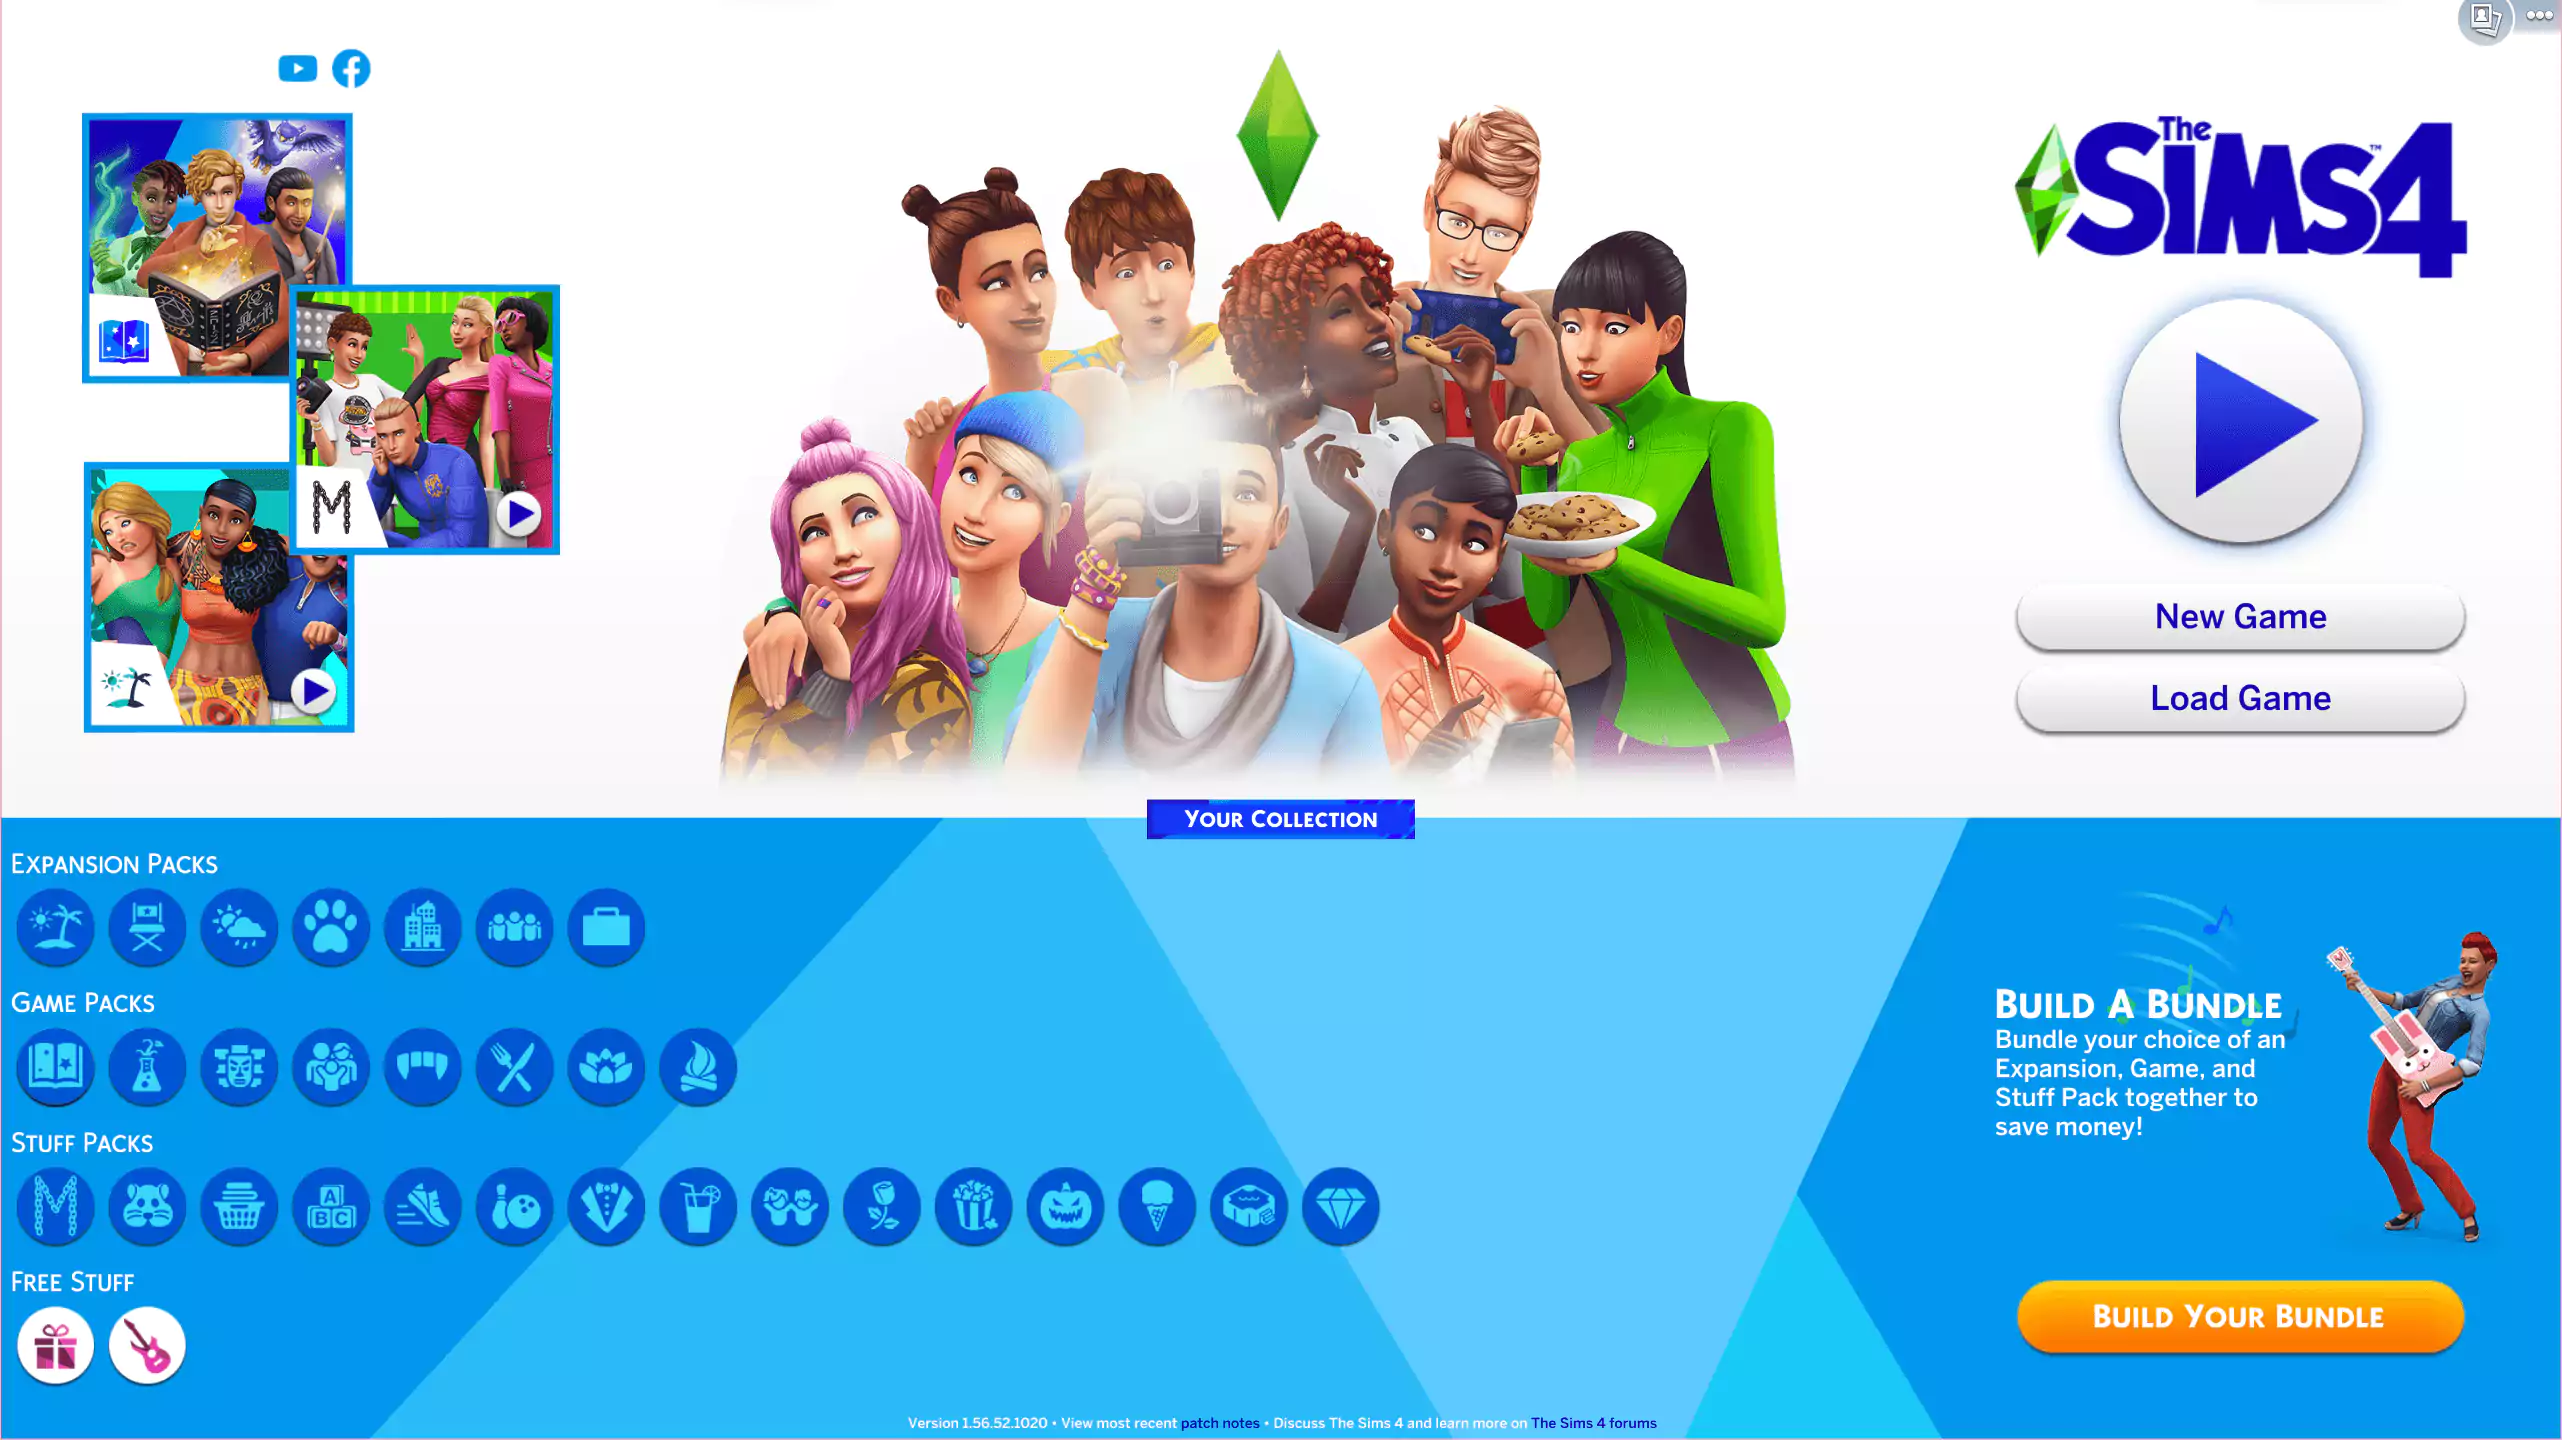 The Sims 4 1.56.52.1020 All in One Customizable [Anadius] - The Sim Architect